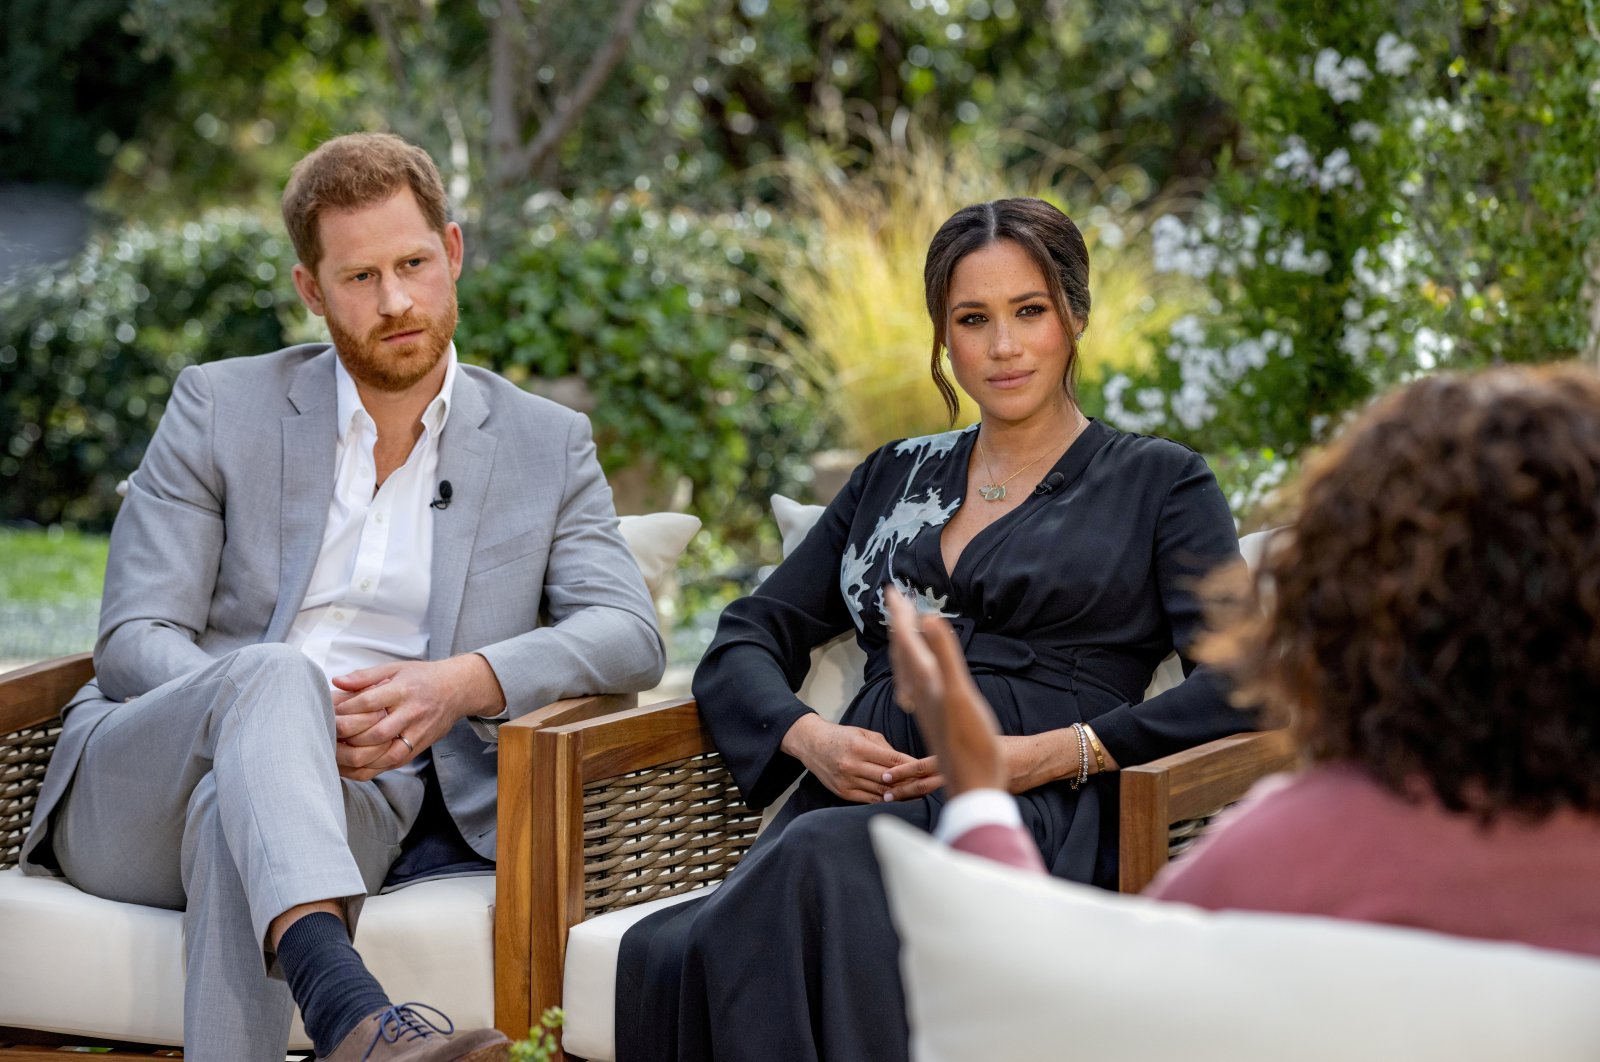 Britain's Prince Harry and Meghan, Duchess of Sussex, are interviewed by Oprah Winfrey in this undated handout photo. (Harpo Productions/Joe Pugliese/Handout via Reuters)